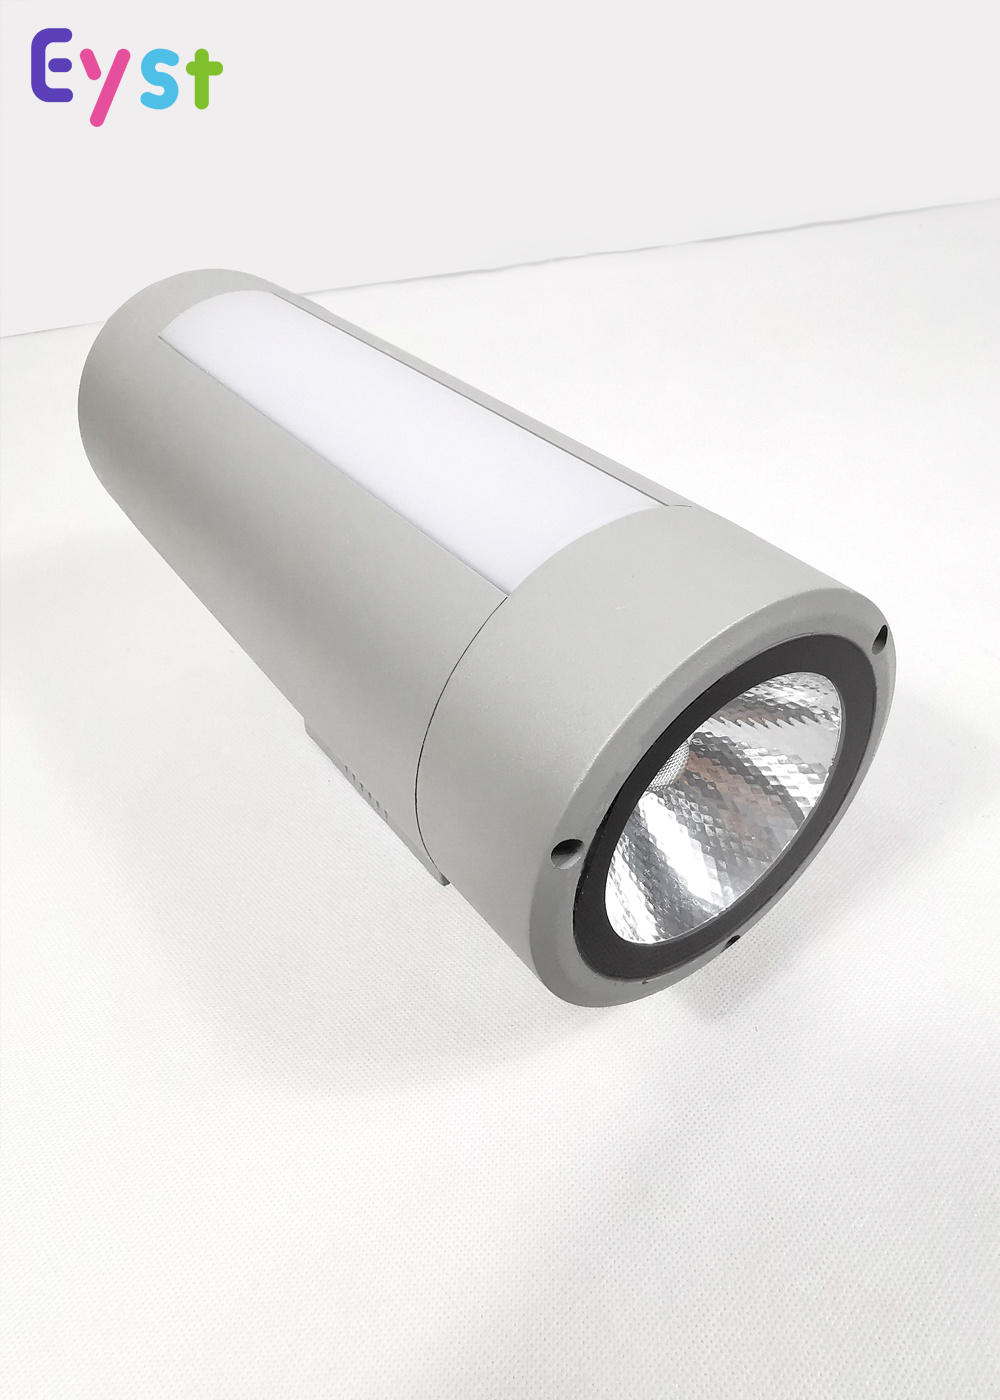 2019 New Product Best Price High Quality Aluminium Waterproof IP66 Outdoor 20W LED Wall Light